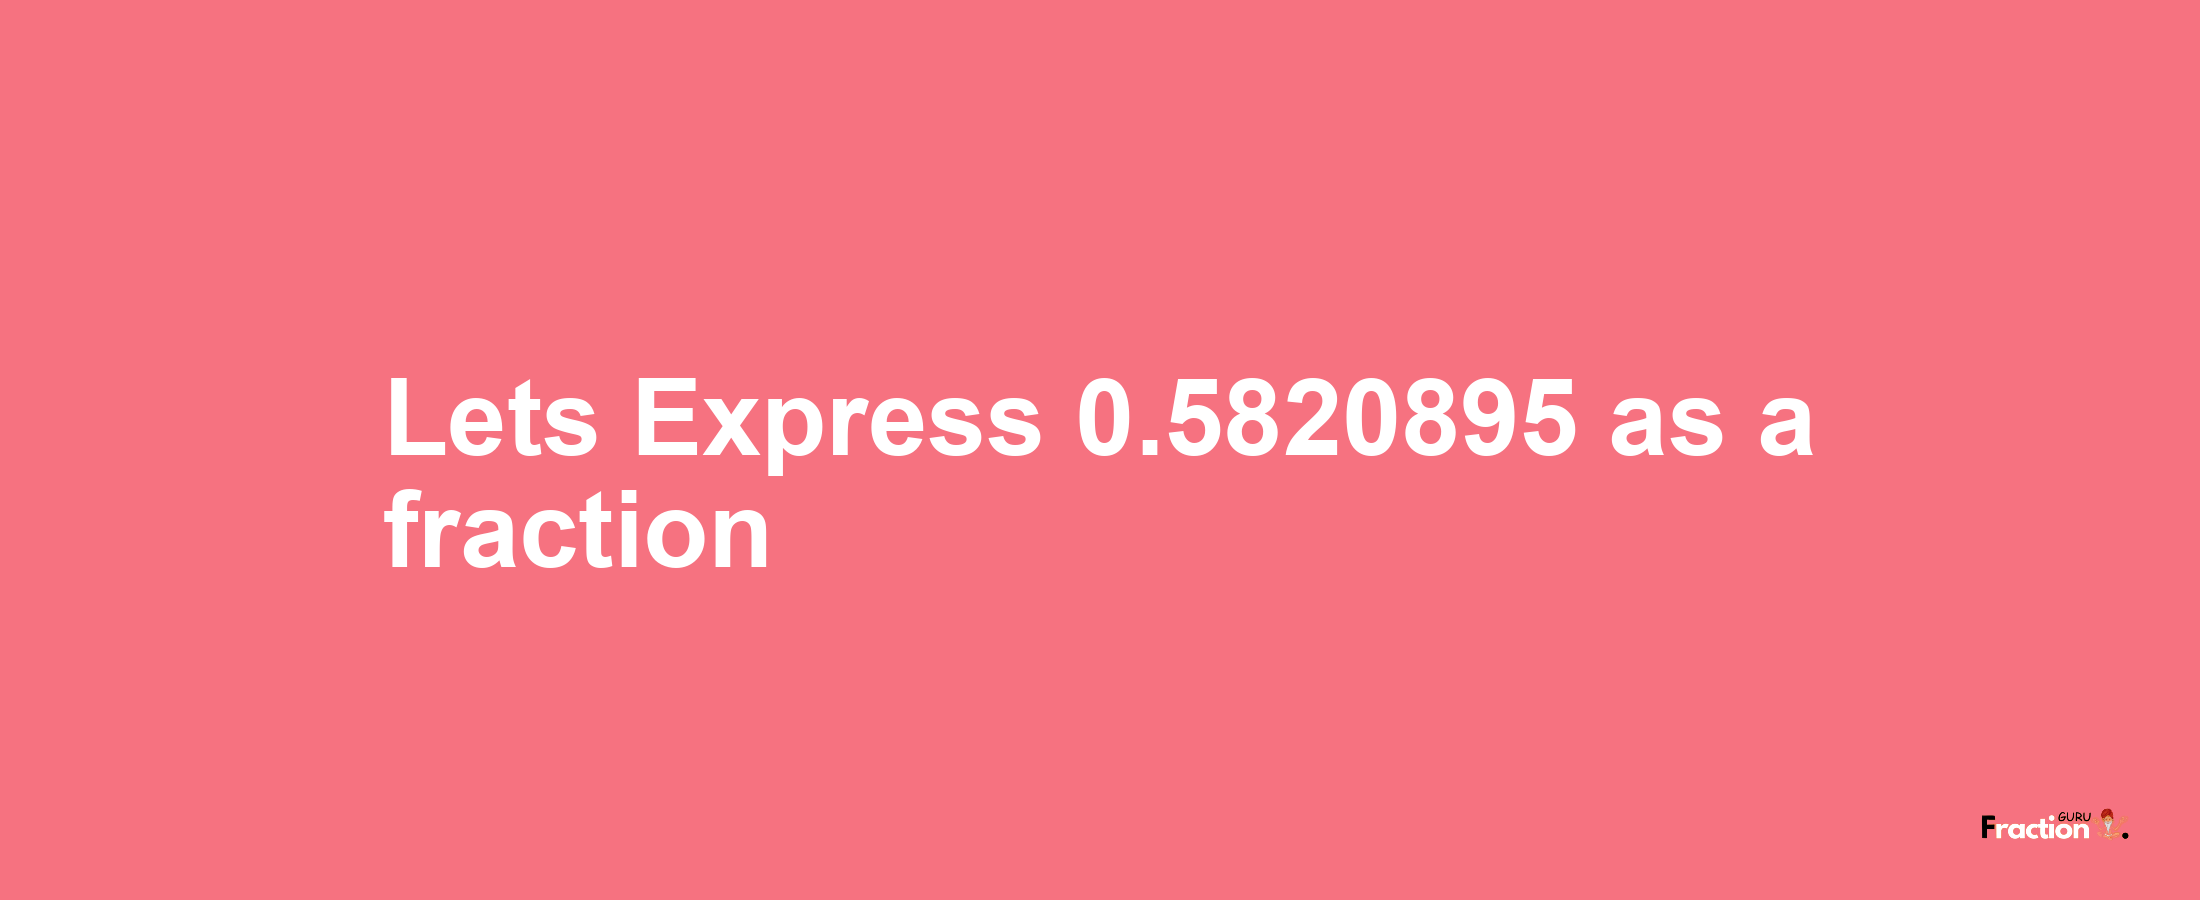 Lets Express 0.5820895 as afraction